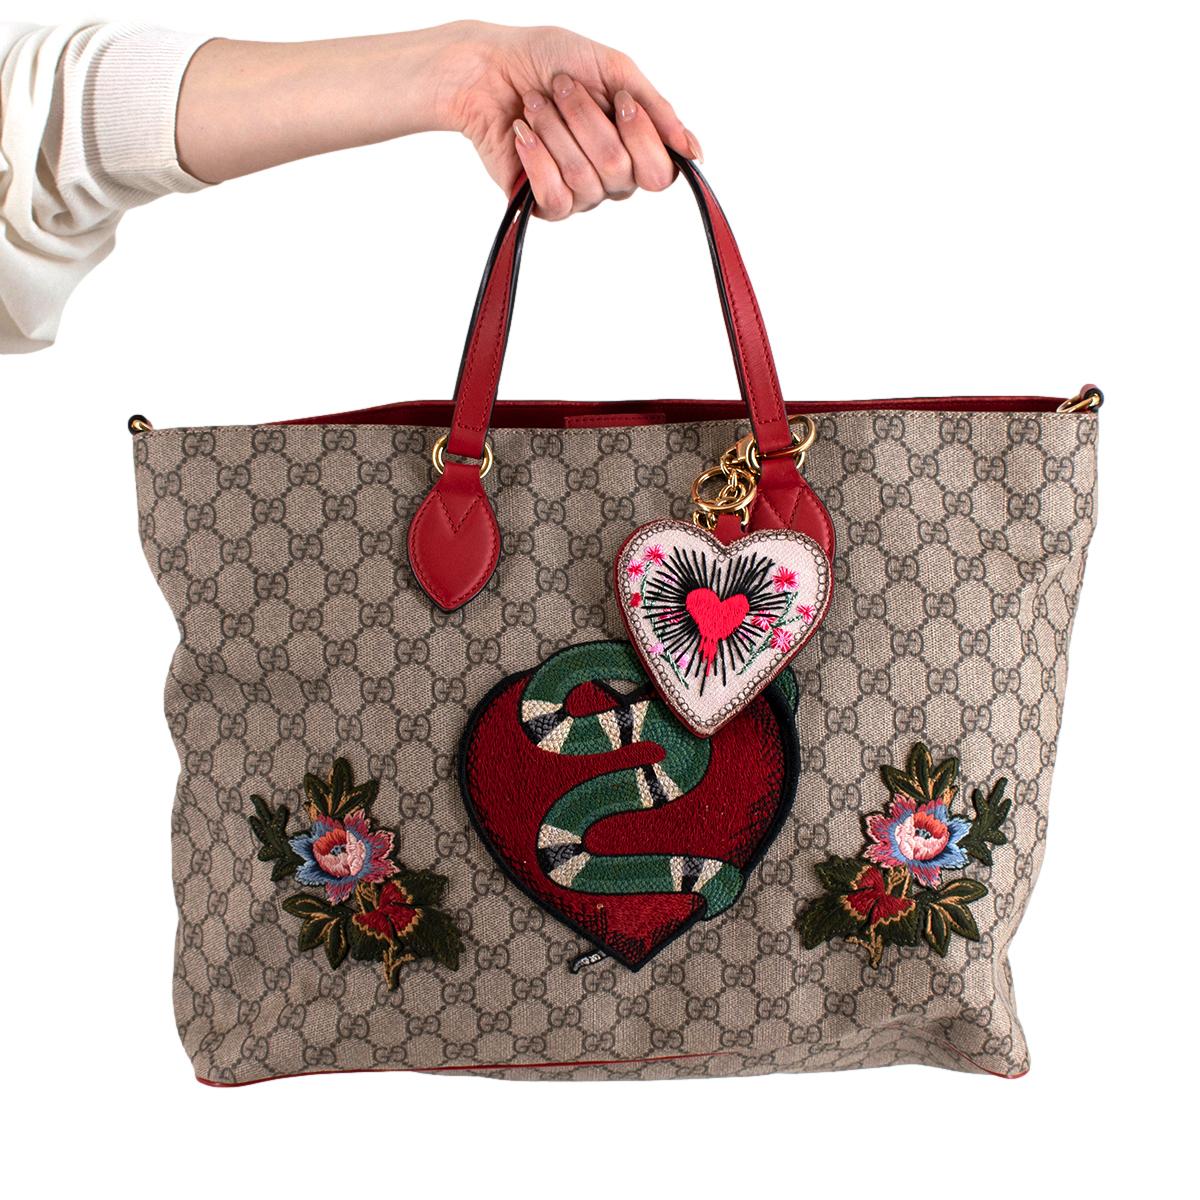 Gucci Limited Edition Red & Brown GG Monogram Canvas Shopper Bag

- Made of the iconic GG monogram canvas 
- Contrasting soft leather trims 
- Gold tone hardware 
- Detachable shoulder strap 
- Heart shaped bag charm
- Embroidered patches 
-